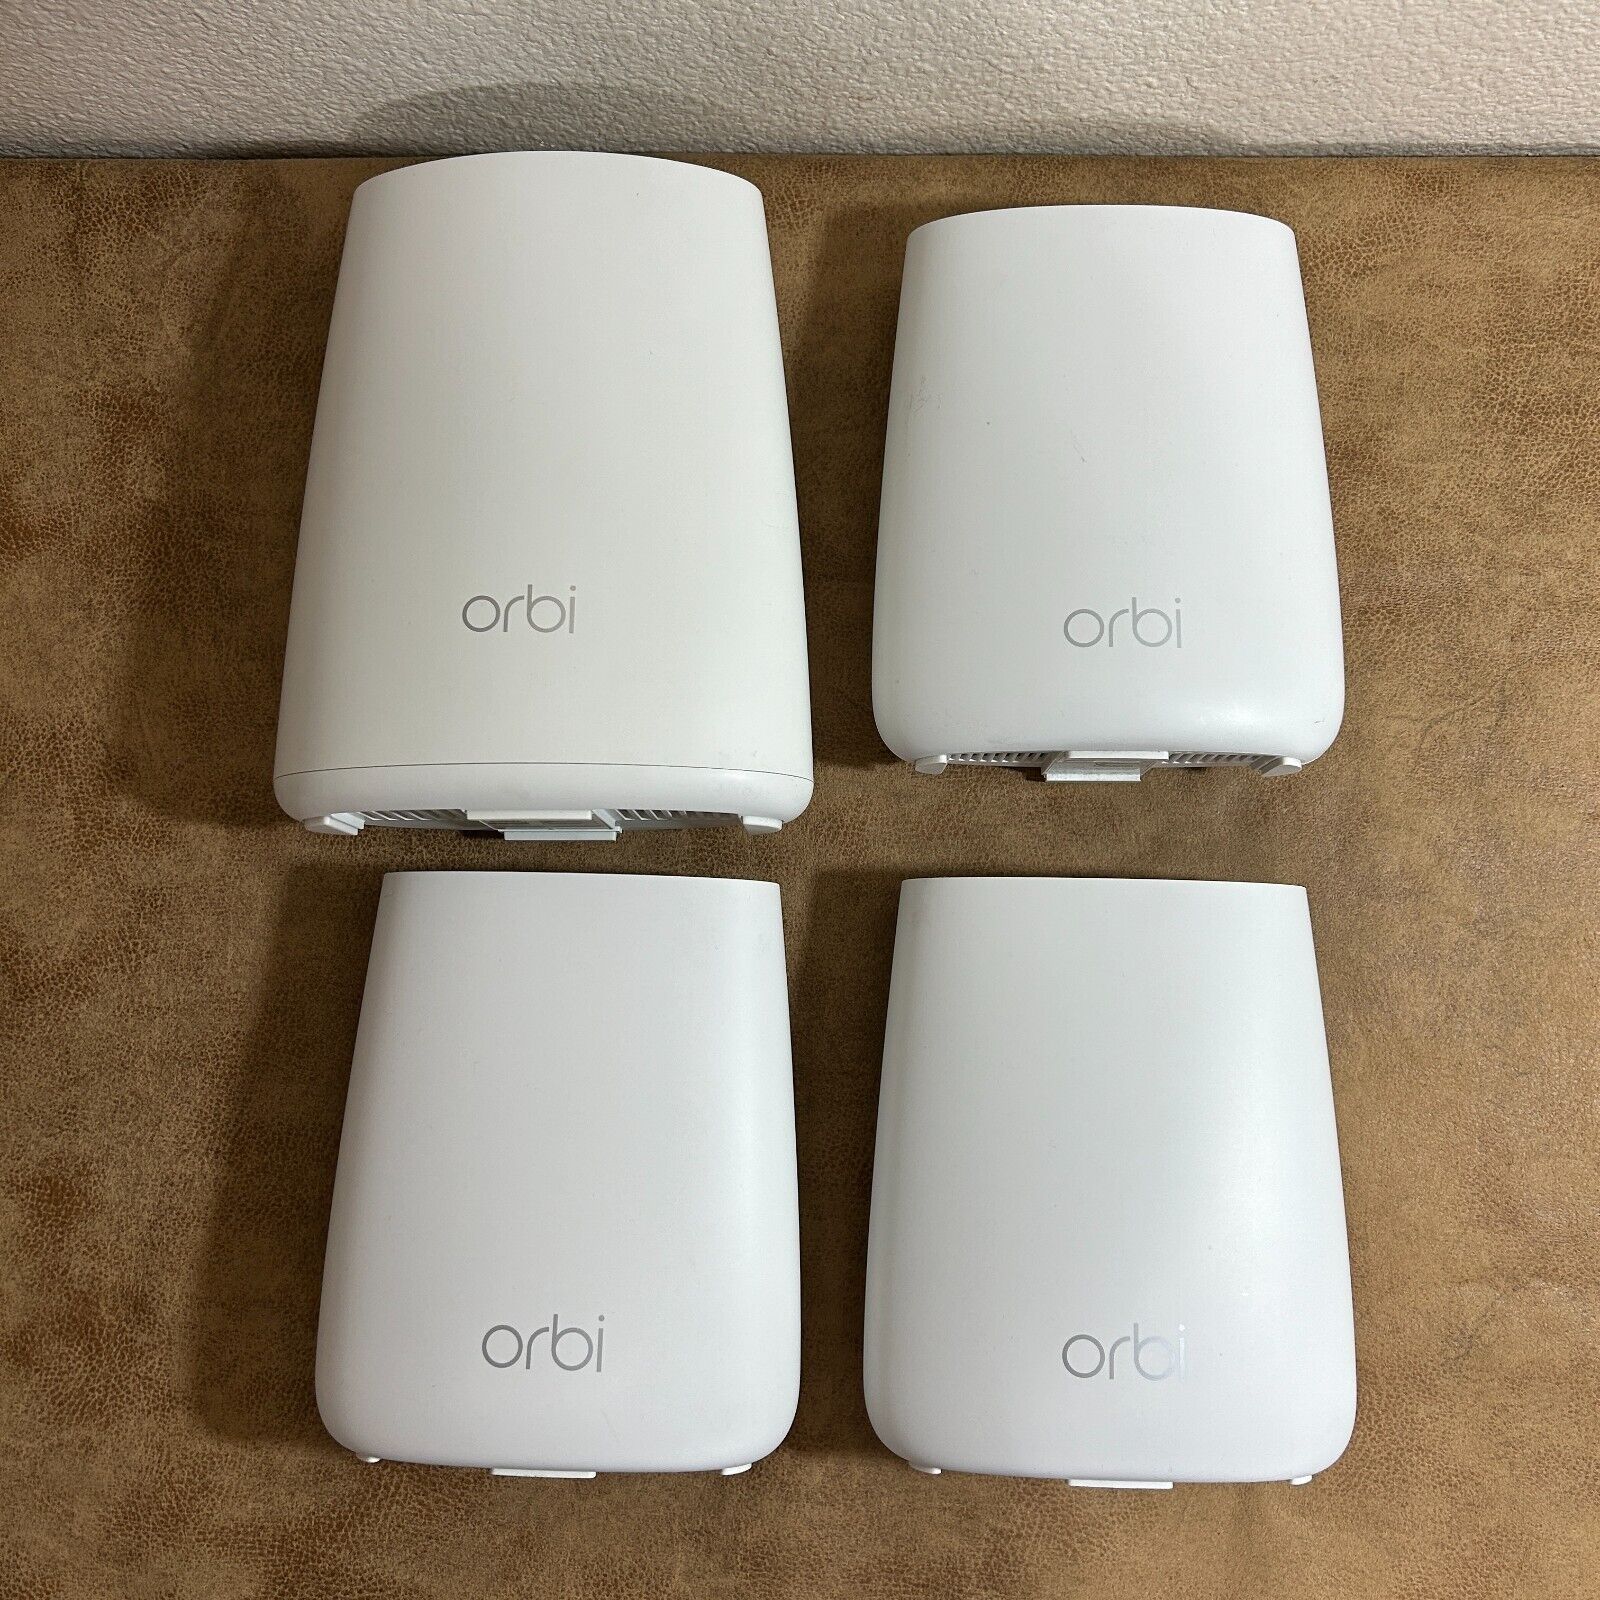 NETGEAR WIFI Orbi Router RBR40 with 3 Satellites RBS20 White With Cords EUC 2519